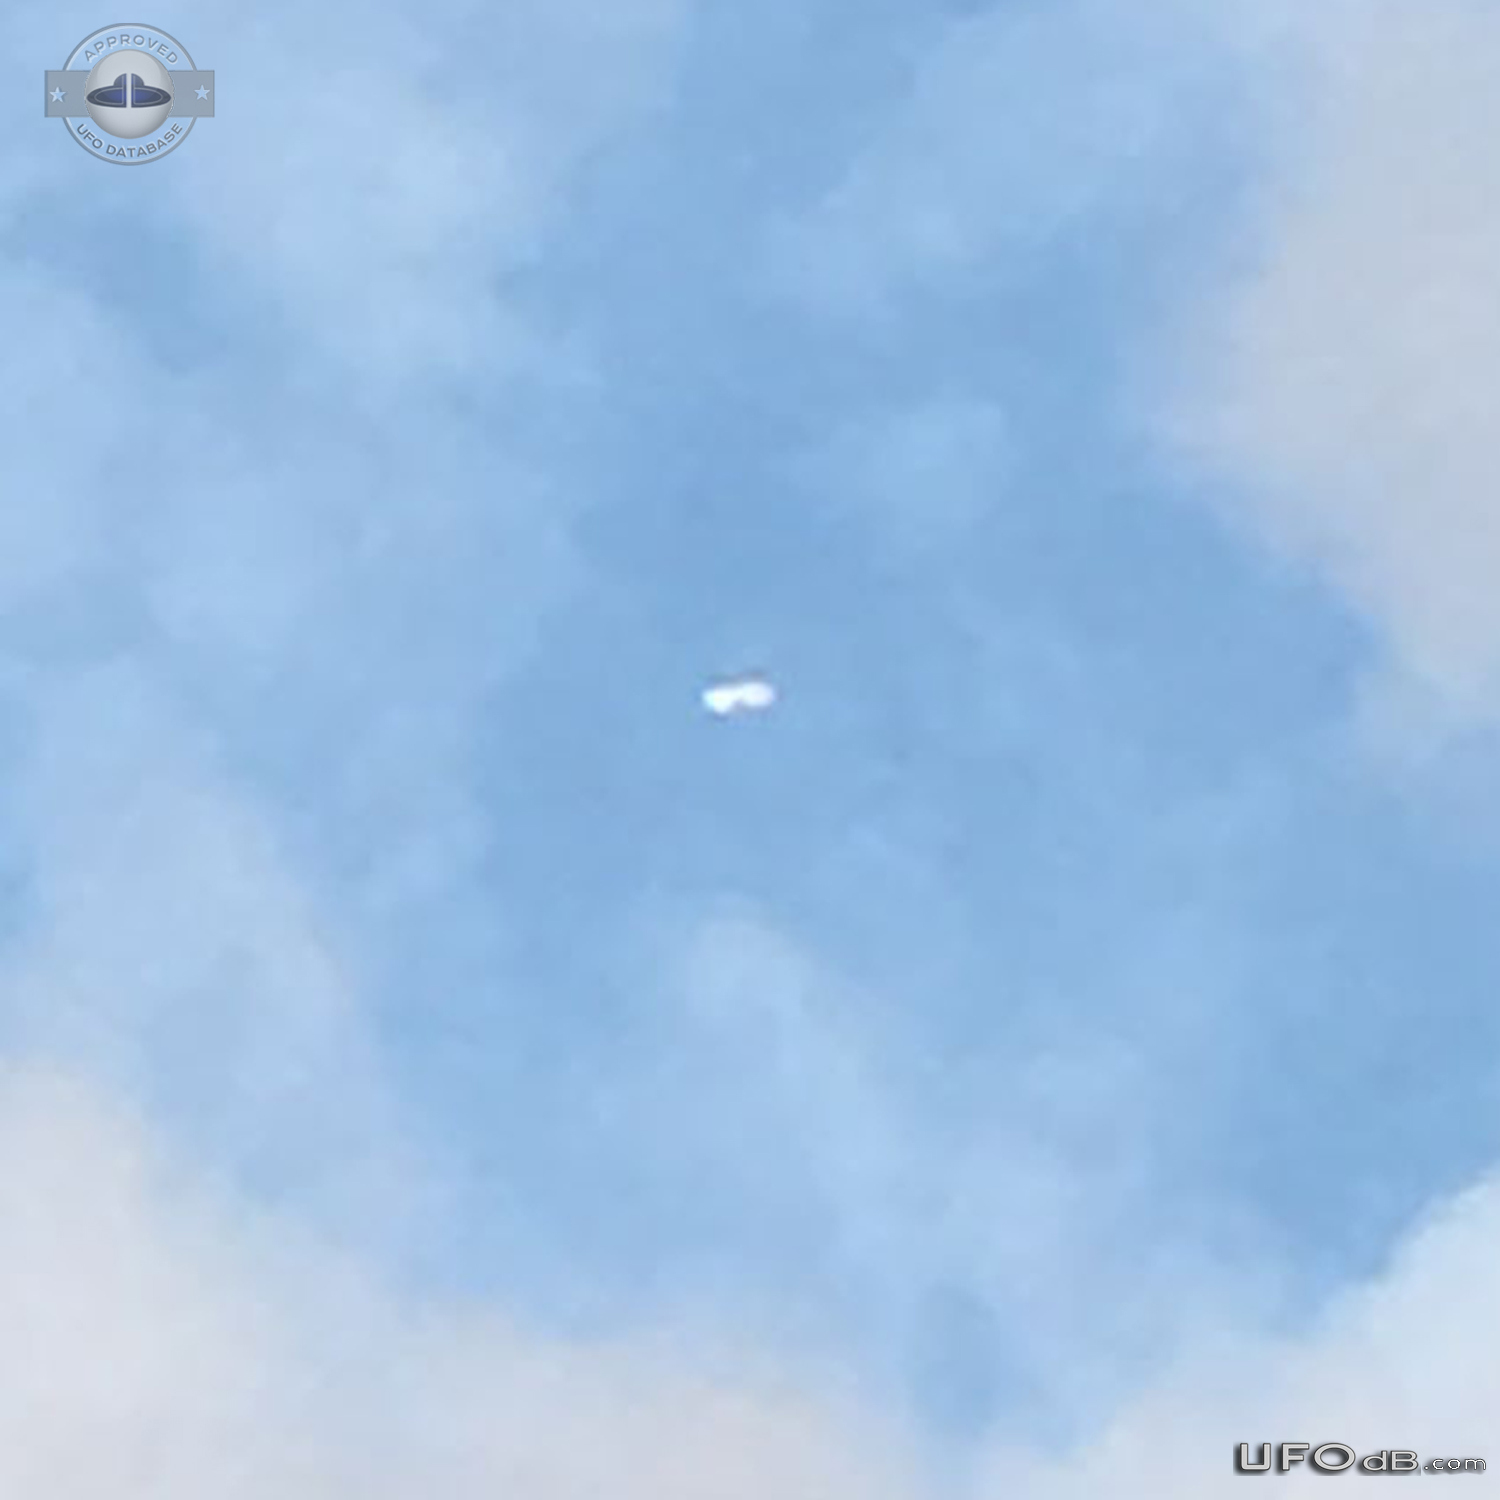 I saw a shiny cigar shaped Ufo in descent through the clouds - Tenness UFO Picture #795-3